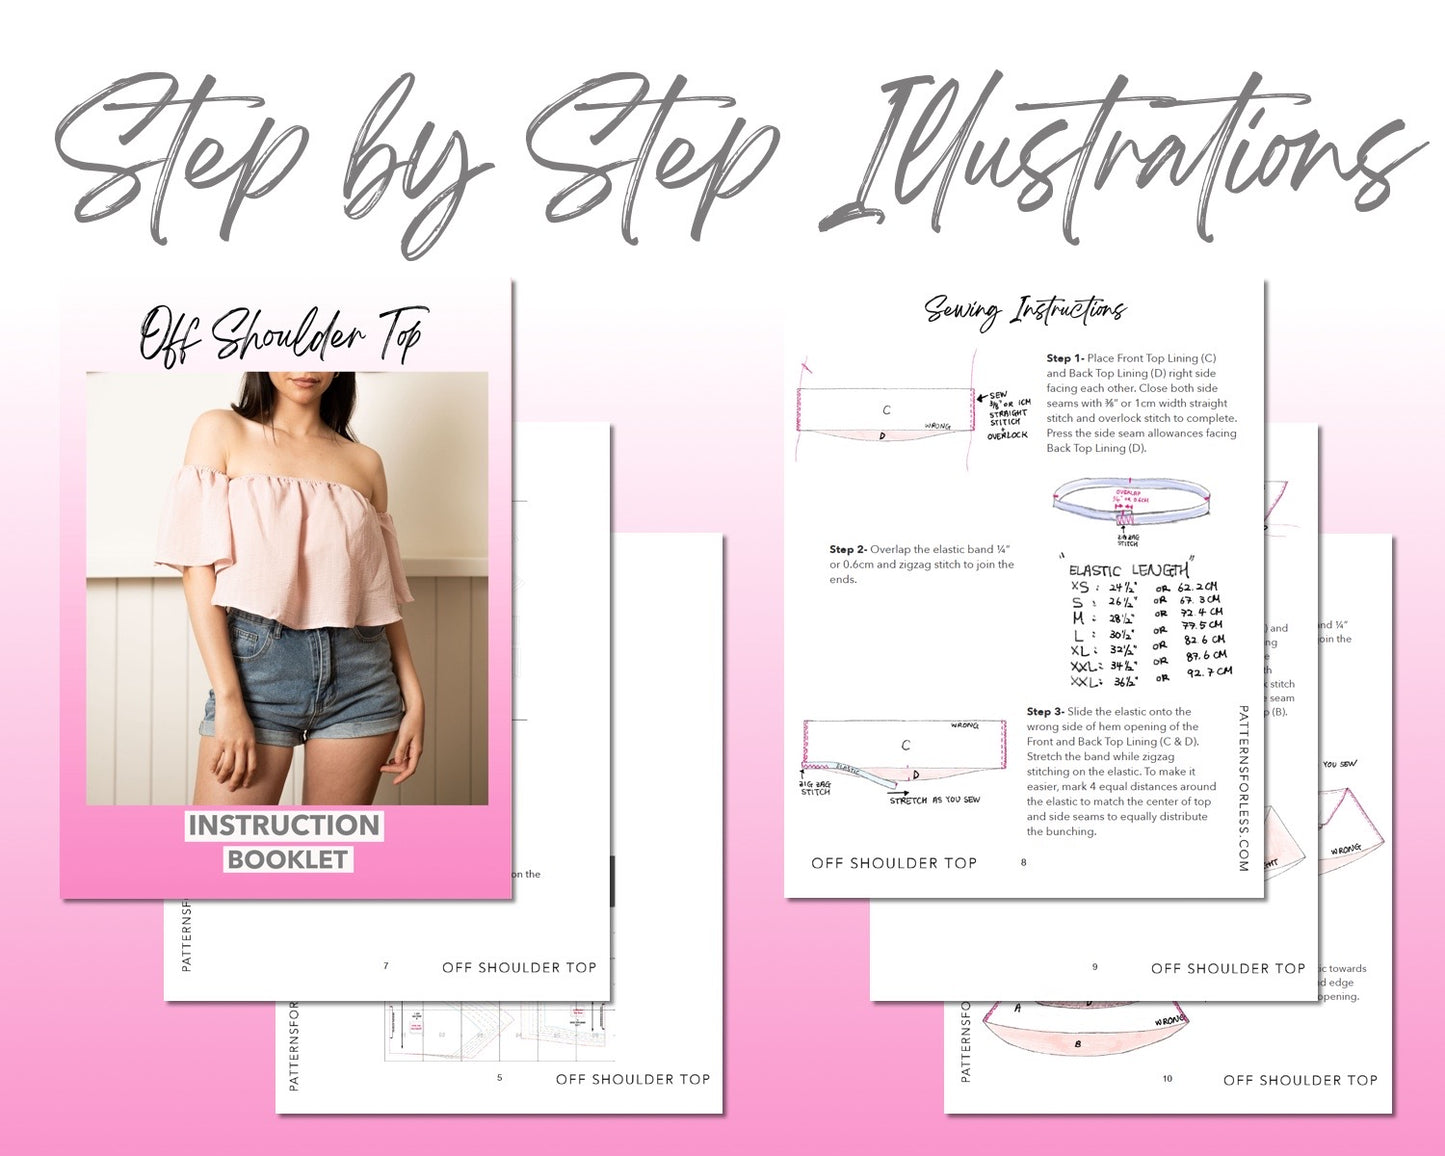 Off Shoulder Crop Top sewing pattern step by step illustrations.